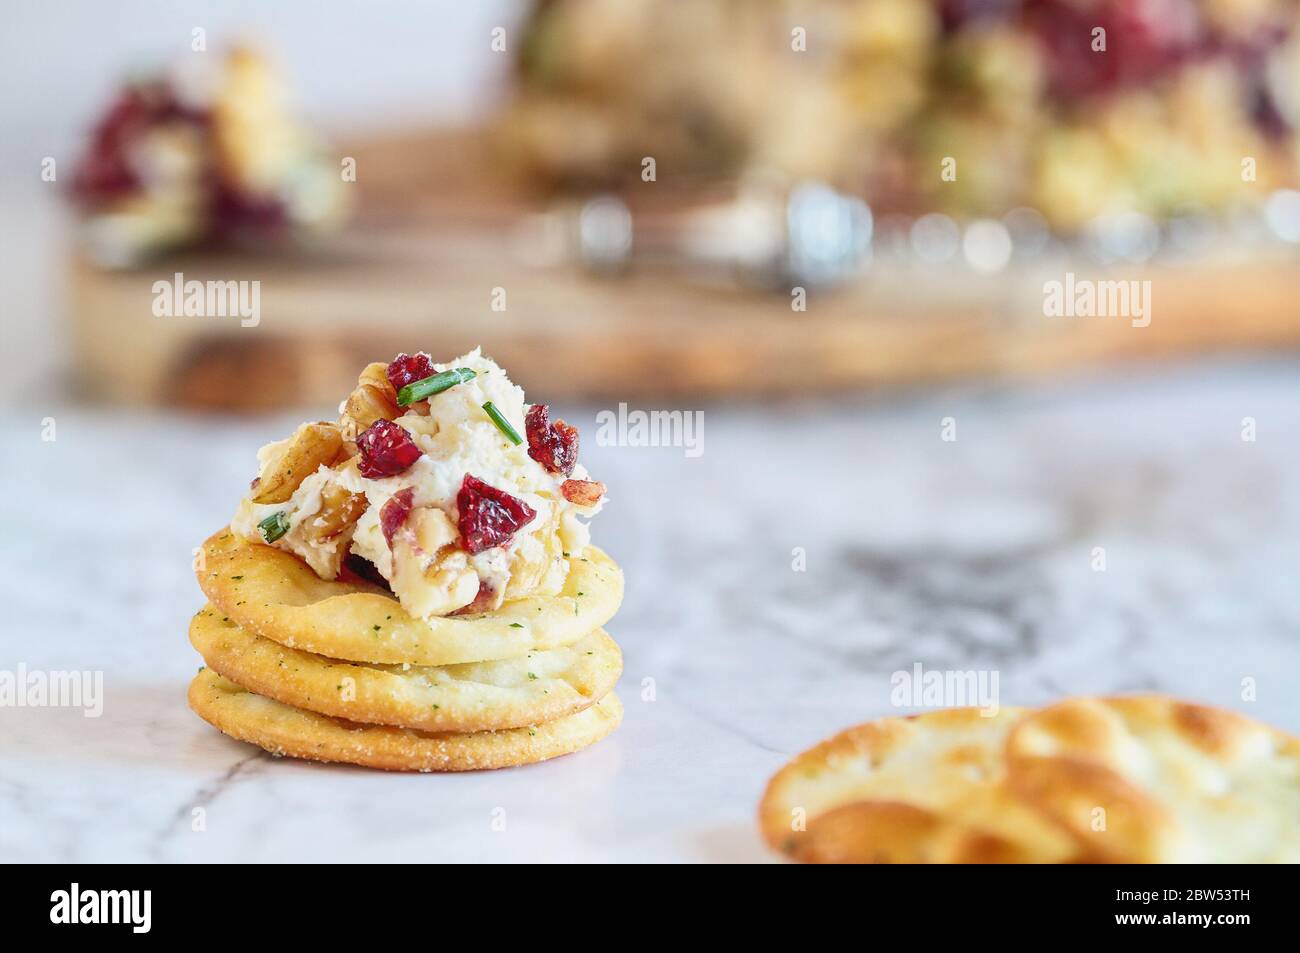 Fresh homemade cranberry cheese spread made with cream cheese, white cheddar, dried cranberries, walnuts, and chive over marble table. Selective focus Stock Photo